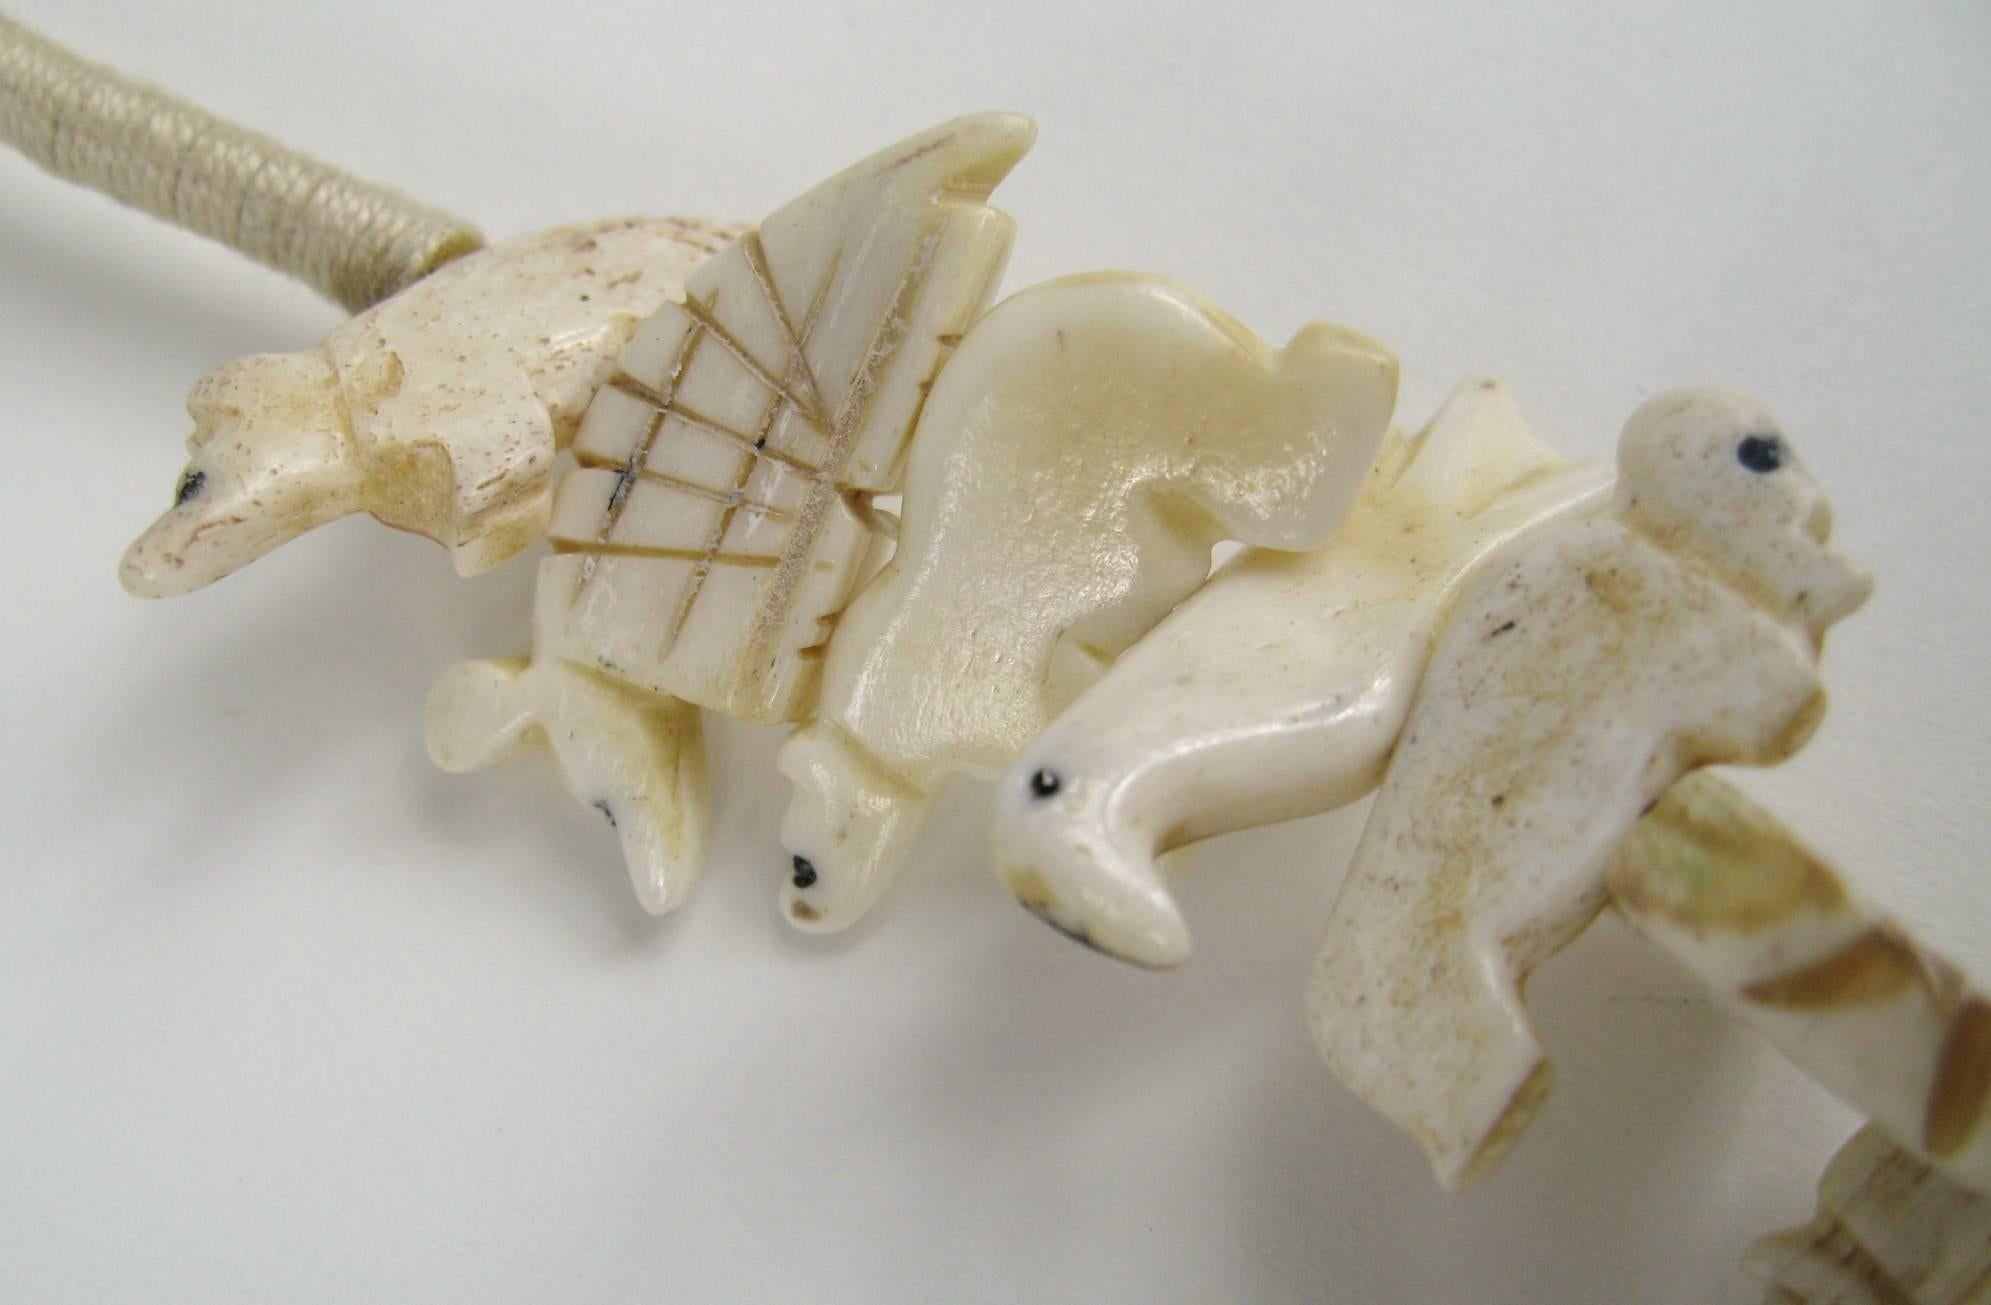  Zuni Fetish 44 Multi animal Bone Leaf Necklace Hand Carved  In Good Condition For Sale In Wallkill, NY